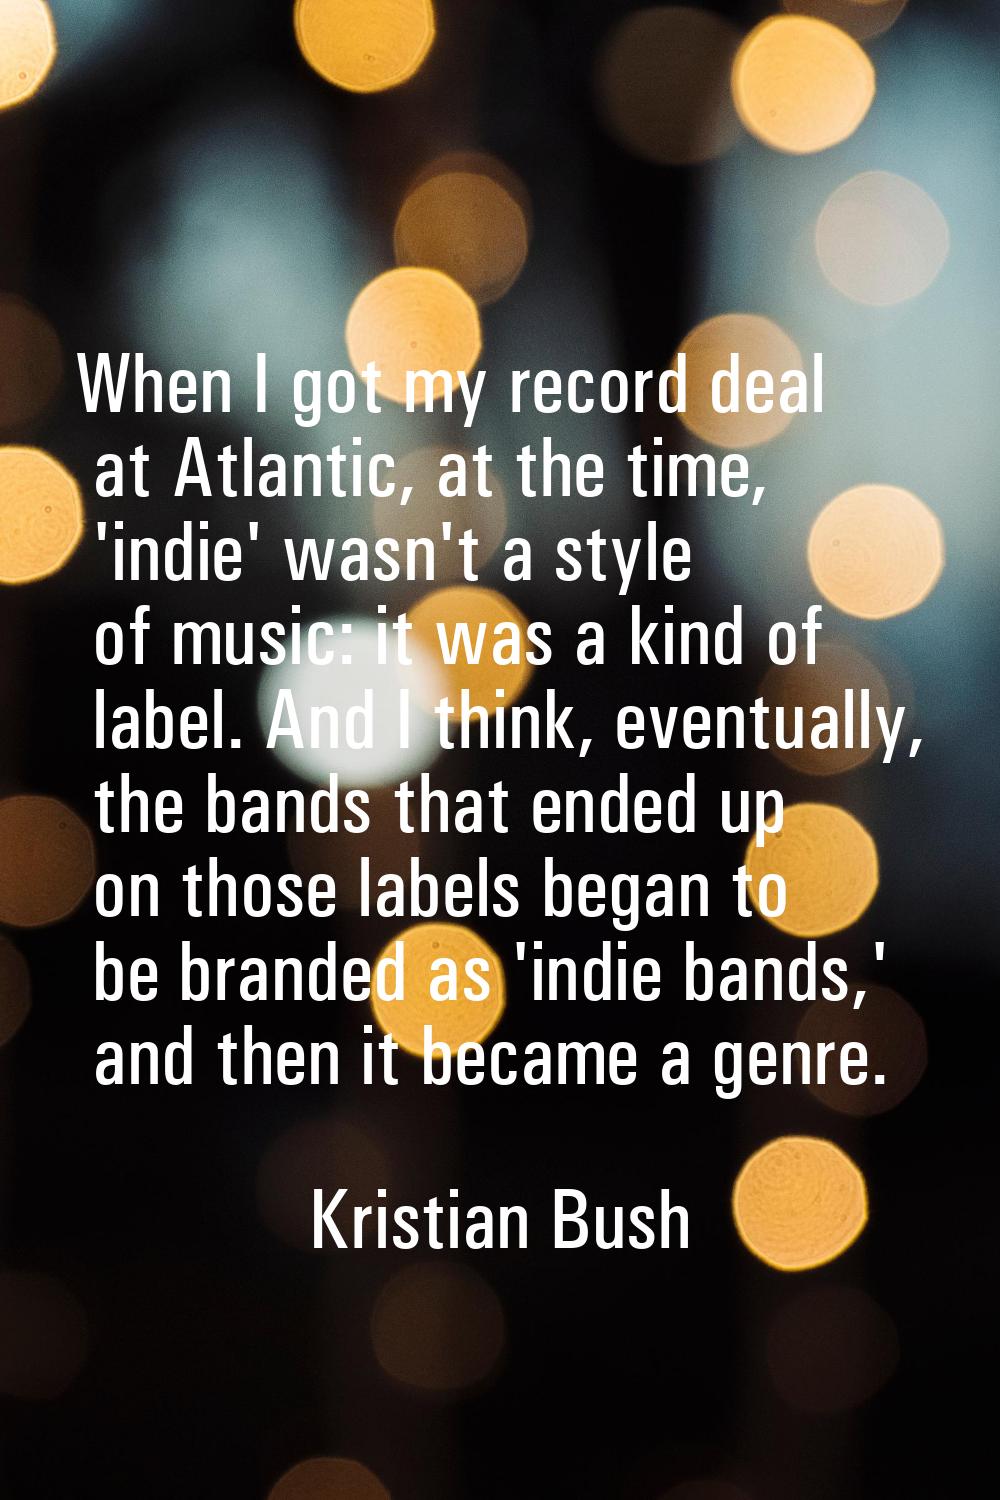 When I got my record deal at Atlantic, at the time, 'indie' wasn't a style of music: it was a kind 